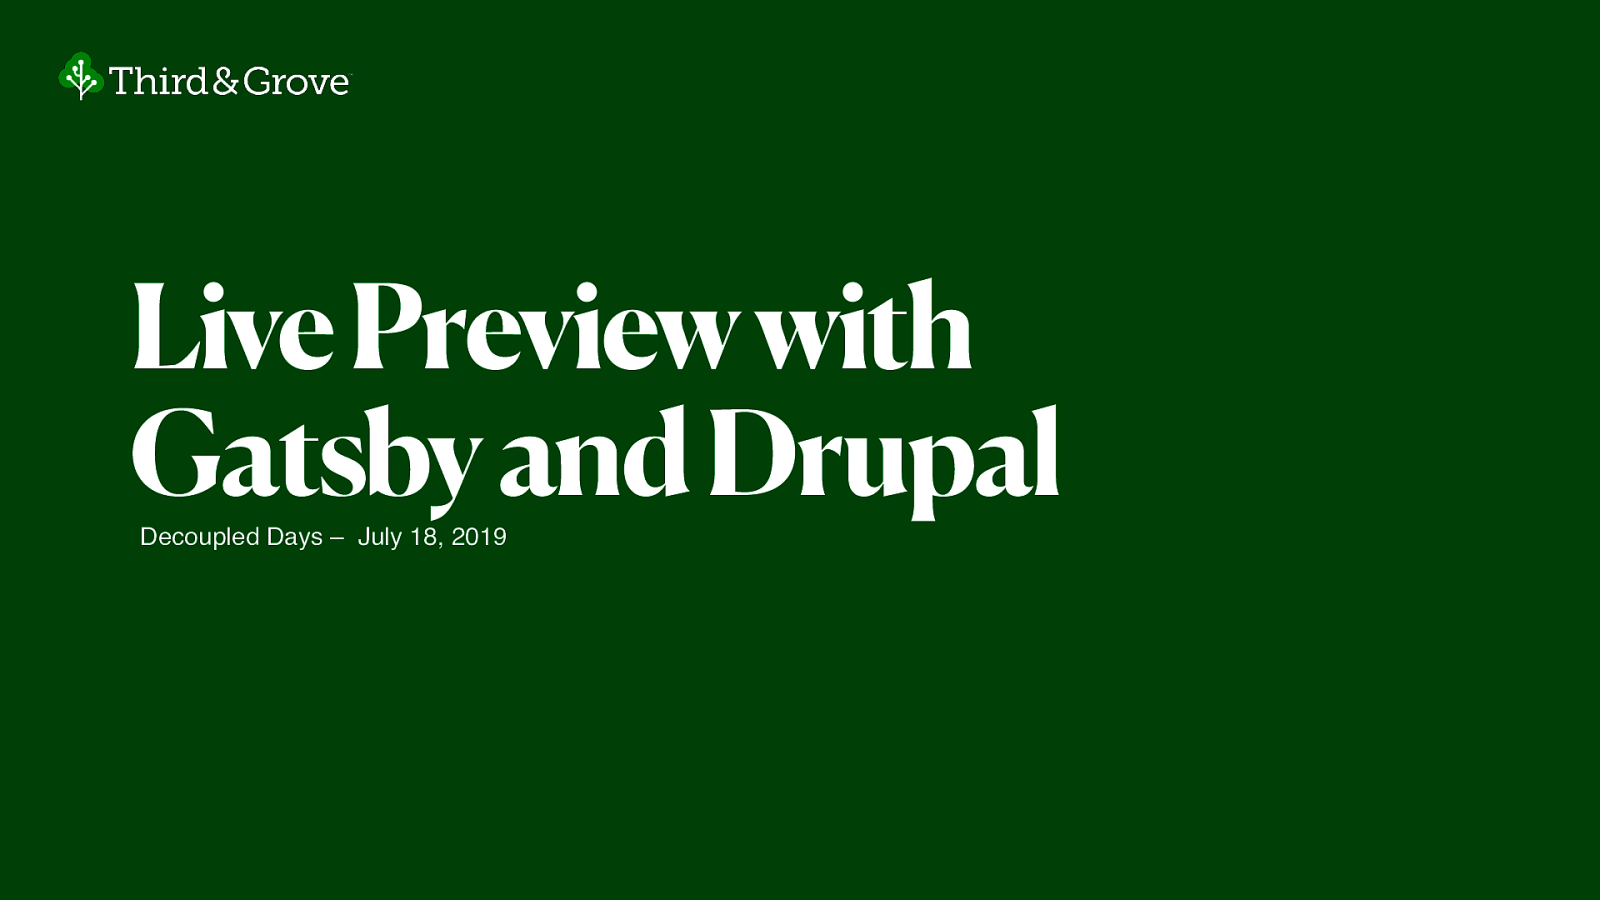 Live Preview with Gatsby and Drupal